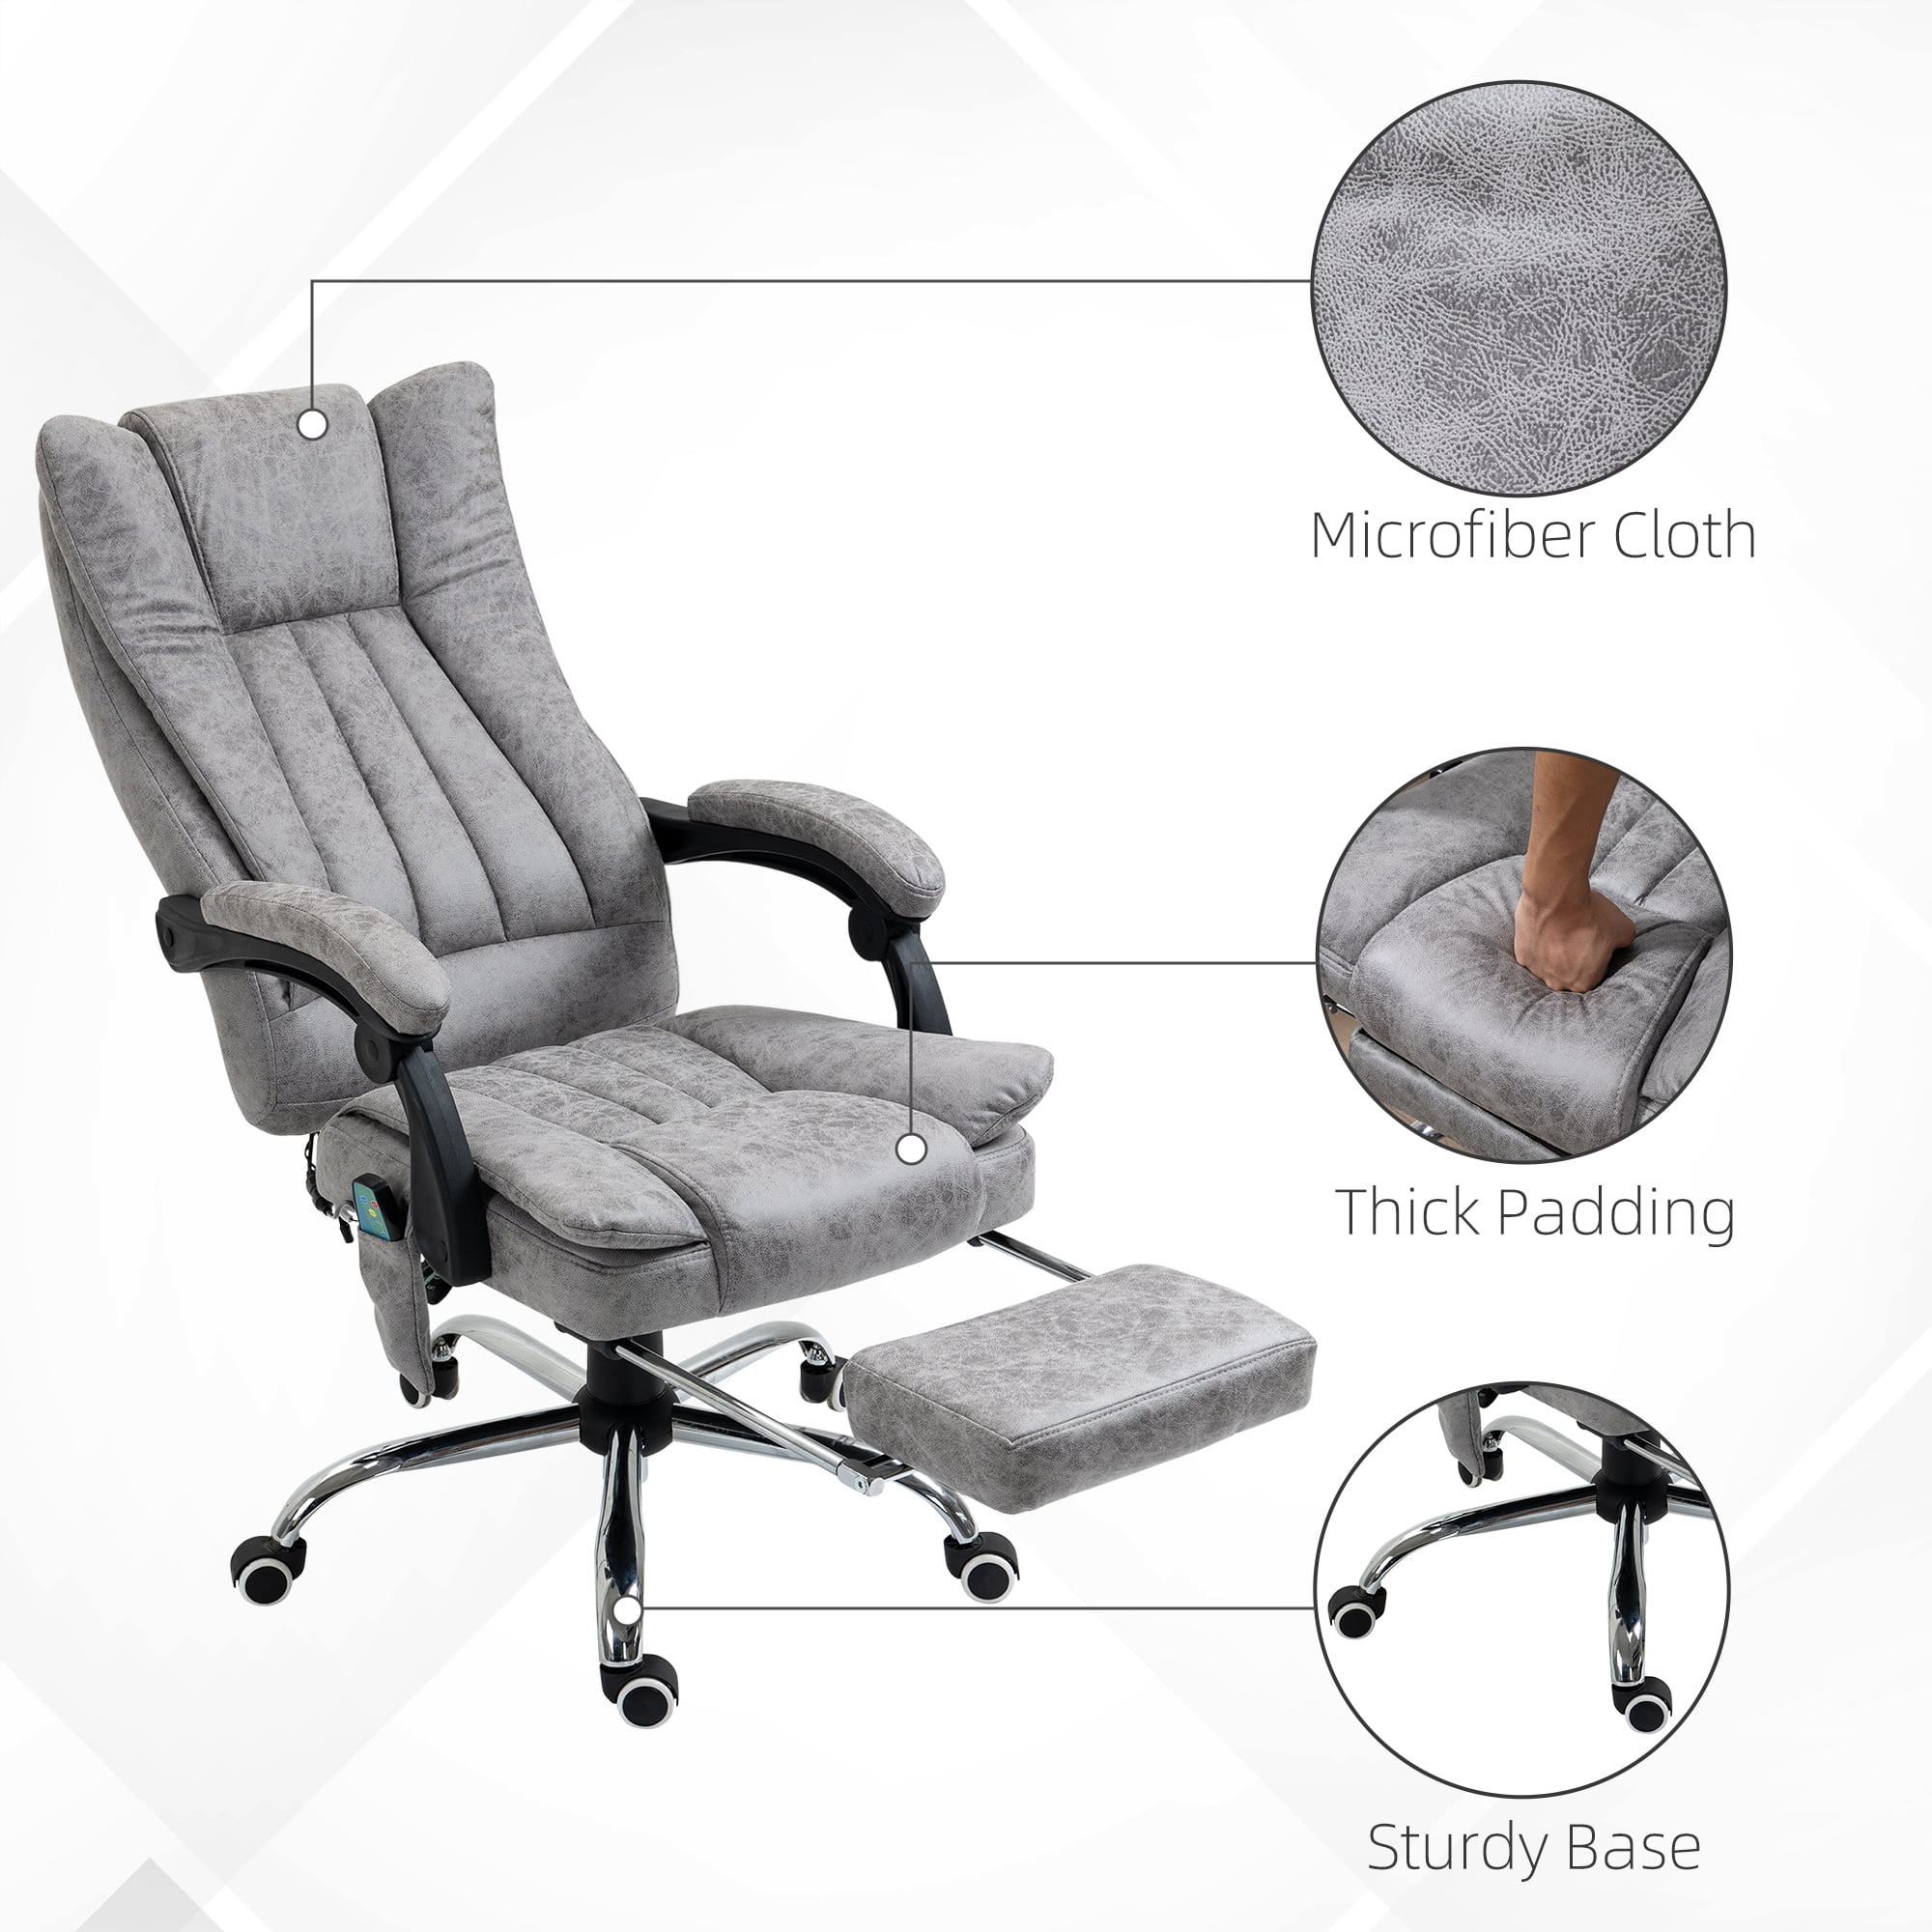 Vinsetto Microfibre Vibration Massage Office Chair, Heated Reclining Computer Chair with Footrest - Cream White